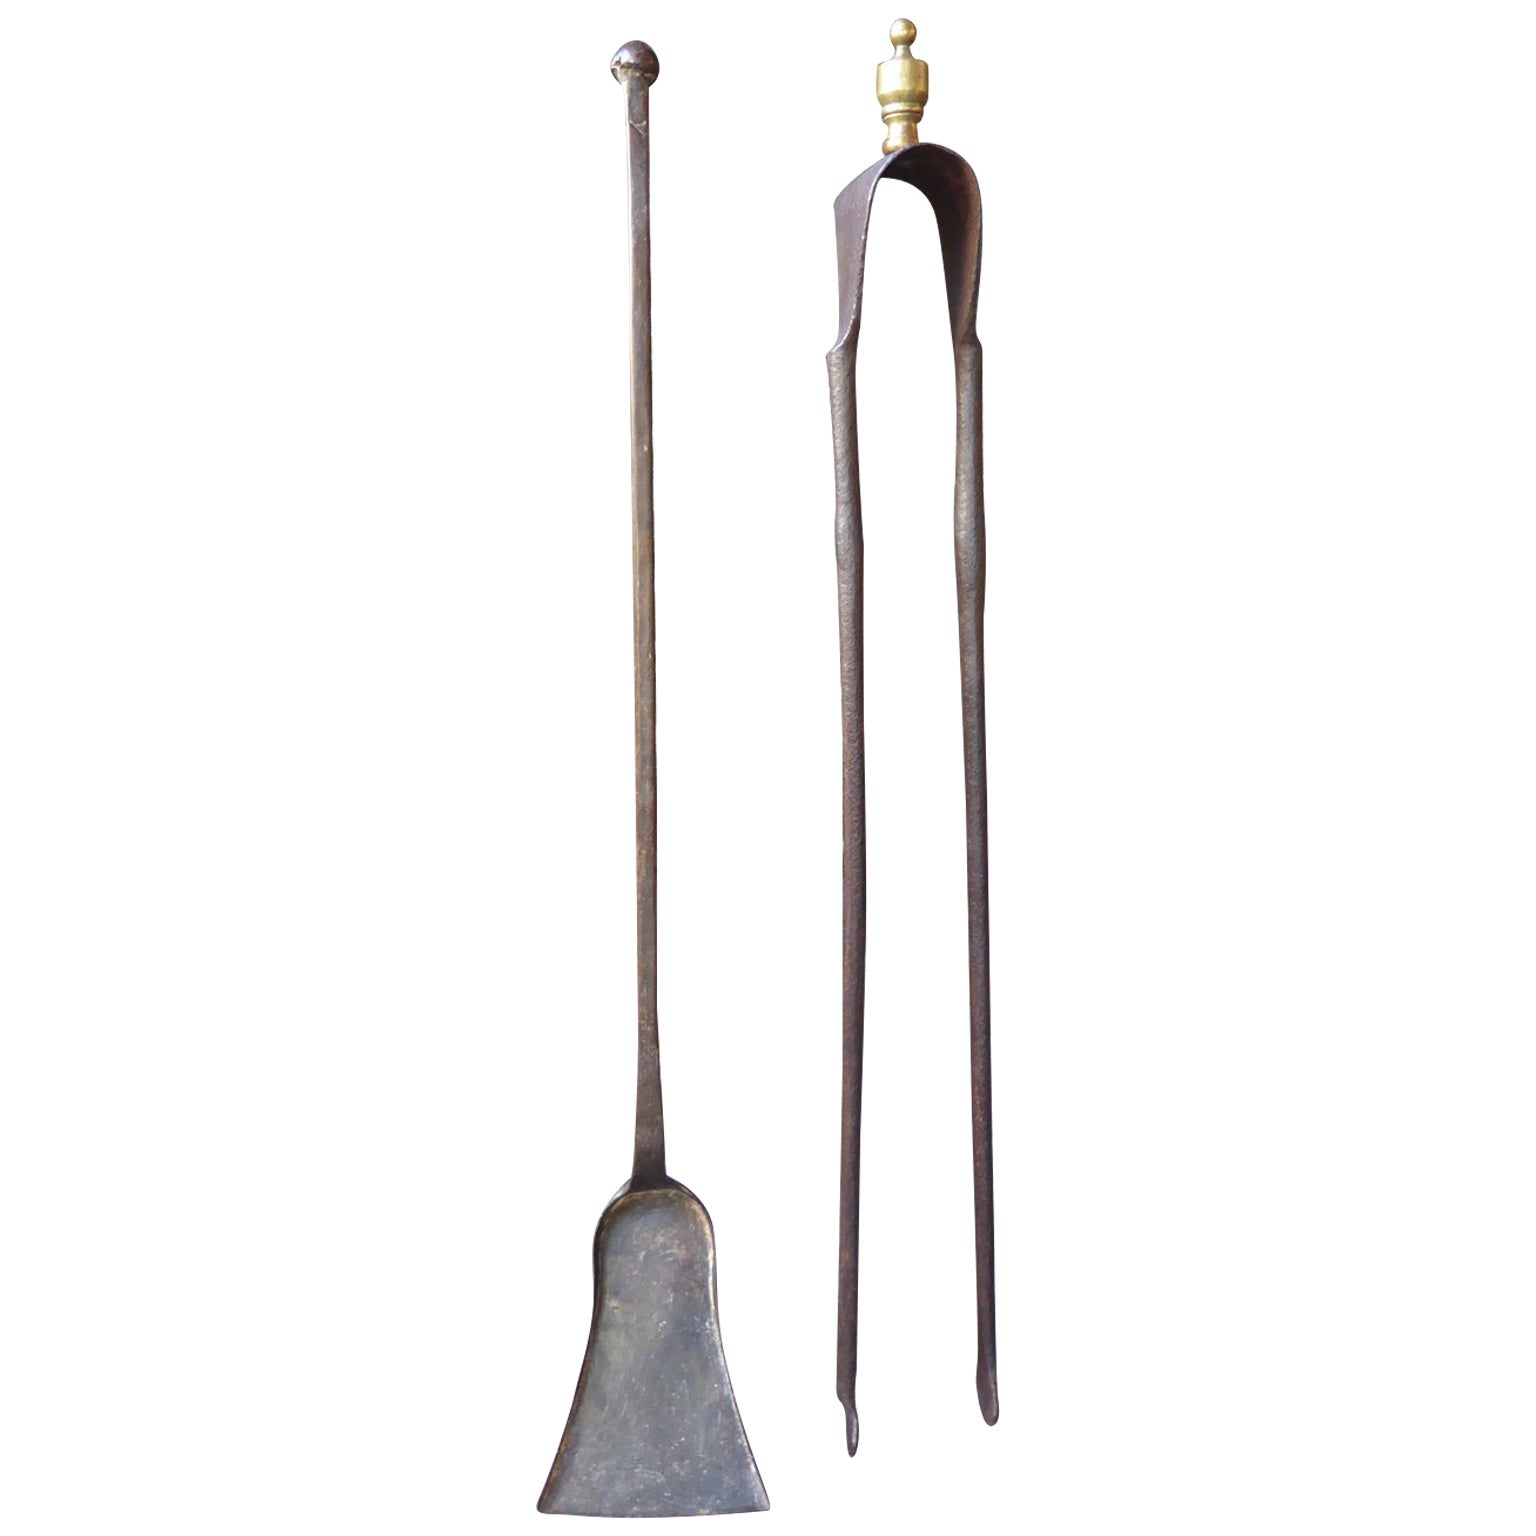 Large French Wrought Iron Fireplace Tools or Fire Tools, 18th Century